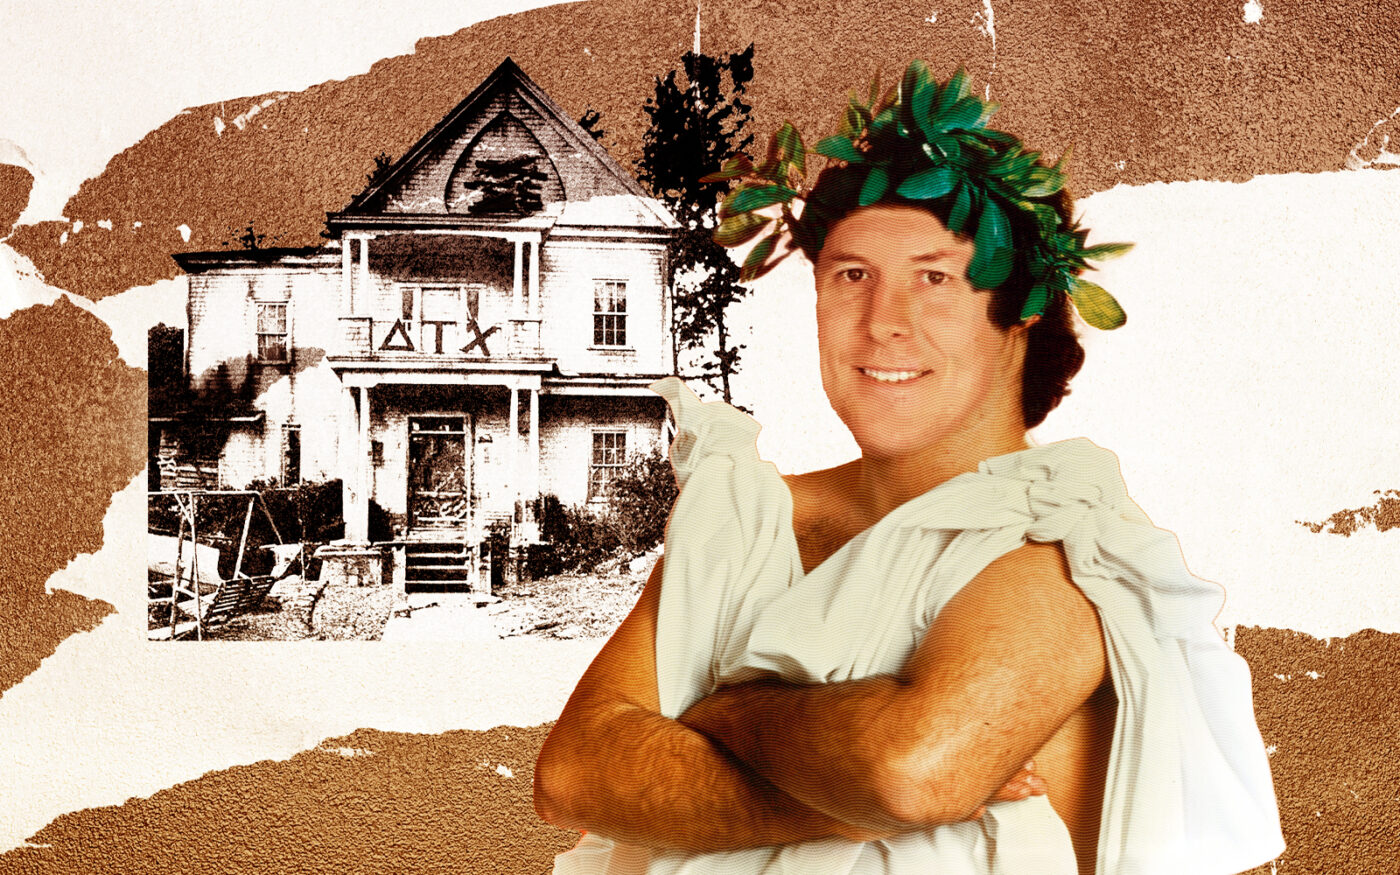 Photo illustration of Landmark Properties CEO Wes Rogers as John “Bluto” Blutarsky in “Animal House” (Photo-illustration by Kevin Rebong/The Real Deal; Getty Images, The Cloisters Miami, Landmark Properties)